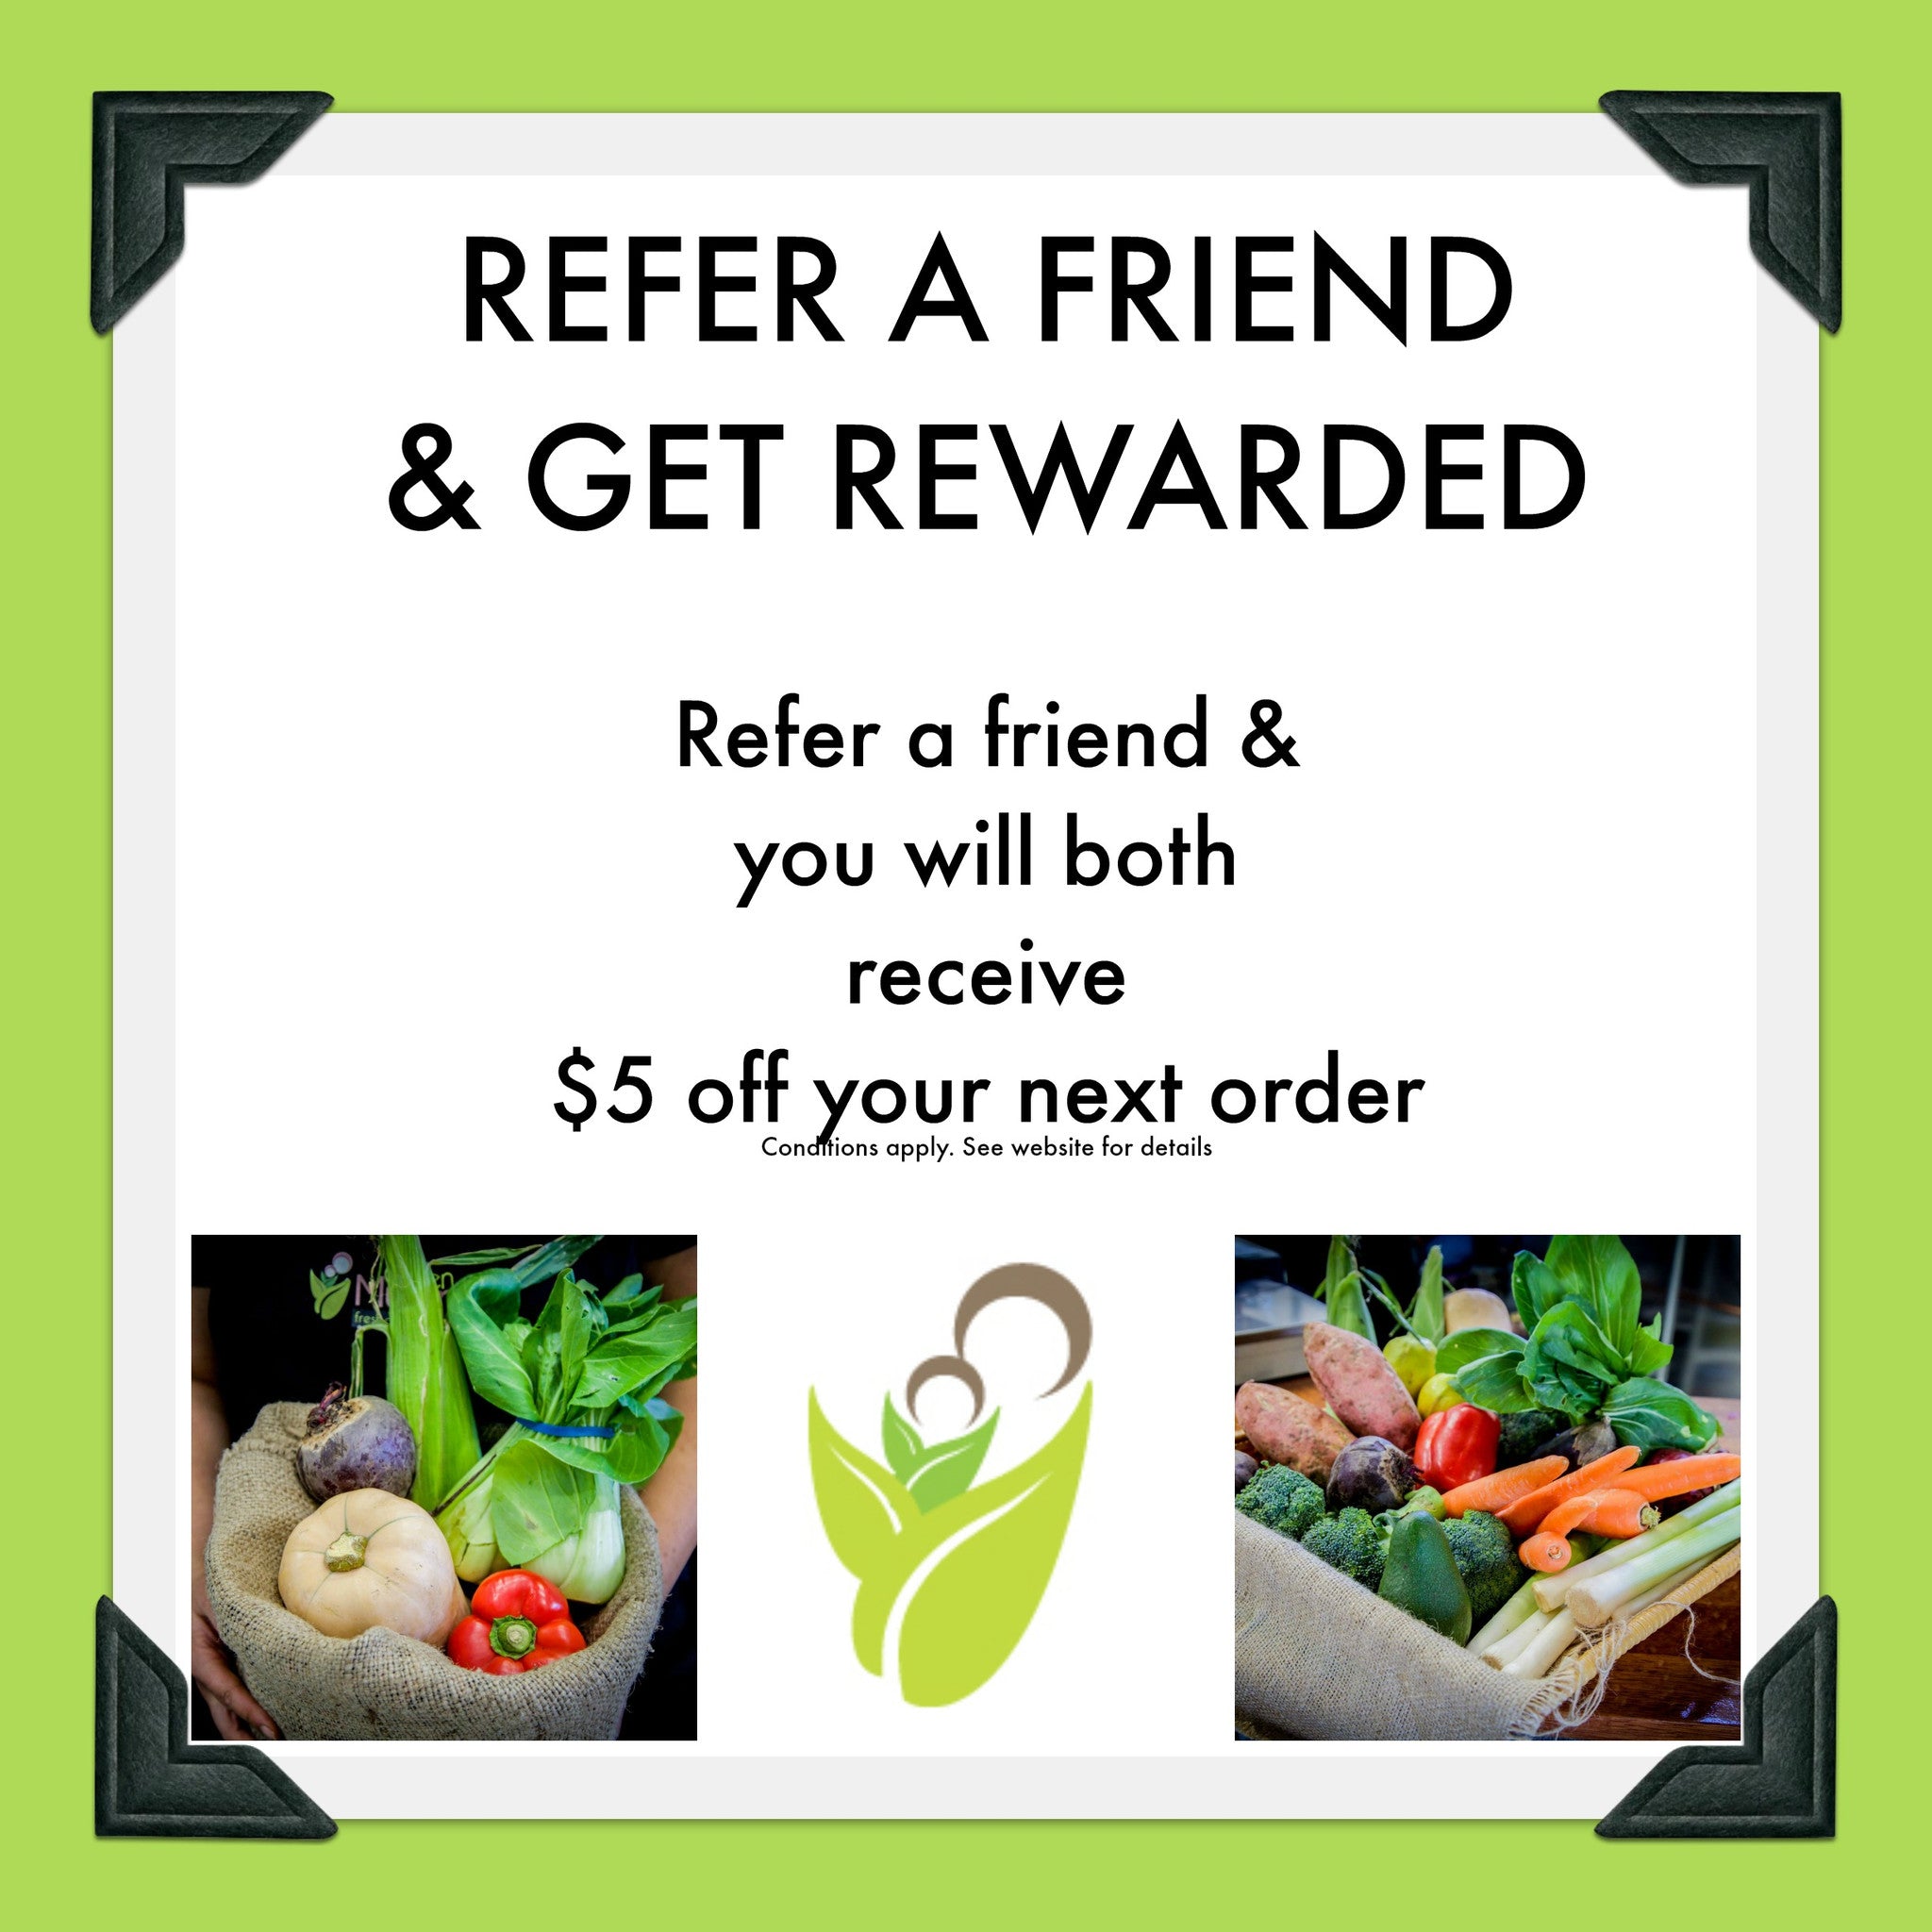 Get rewarded by referring your friends